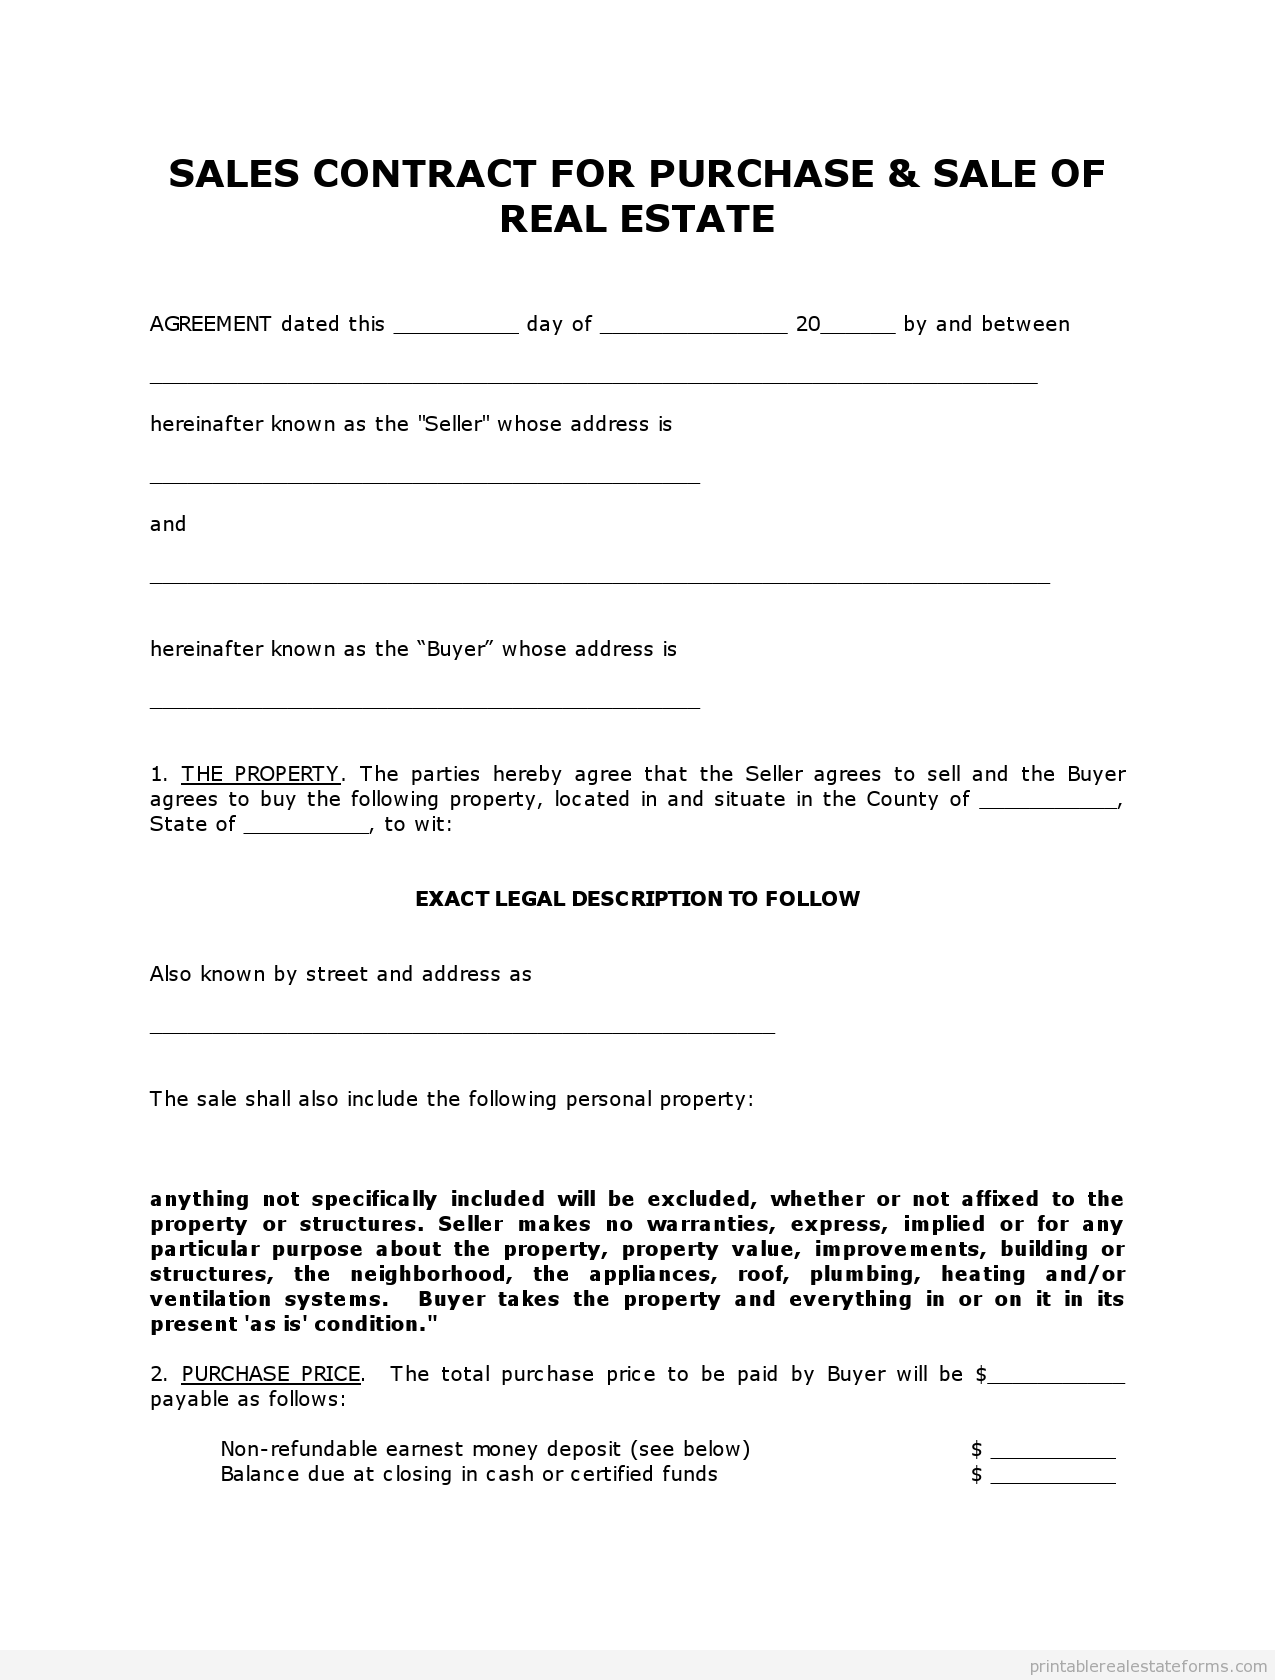 Land Contract Forms | Free Contract for Deed Form (US) | LawDepot